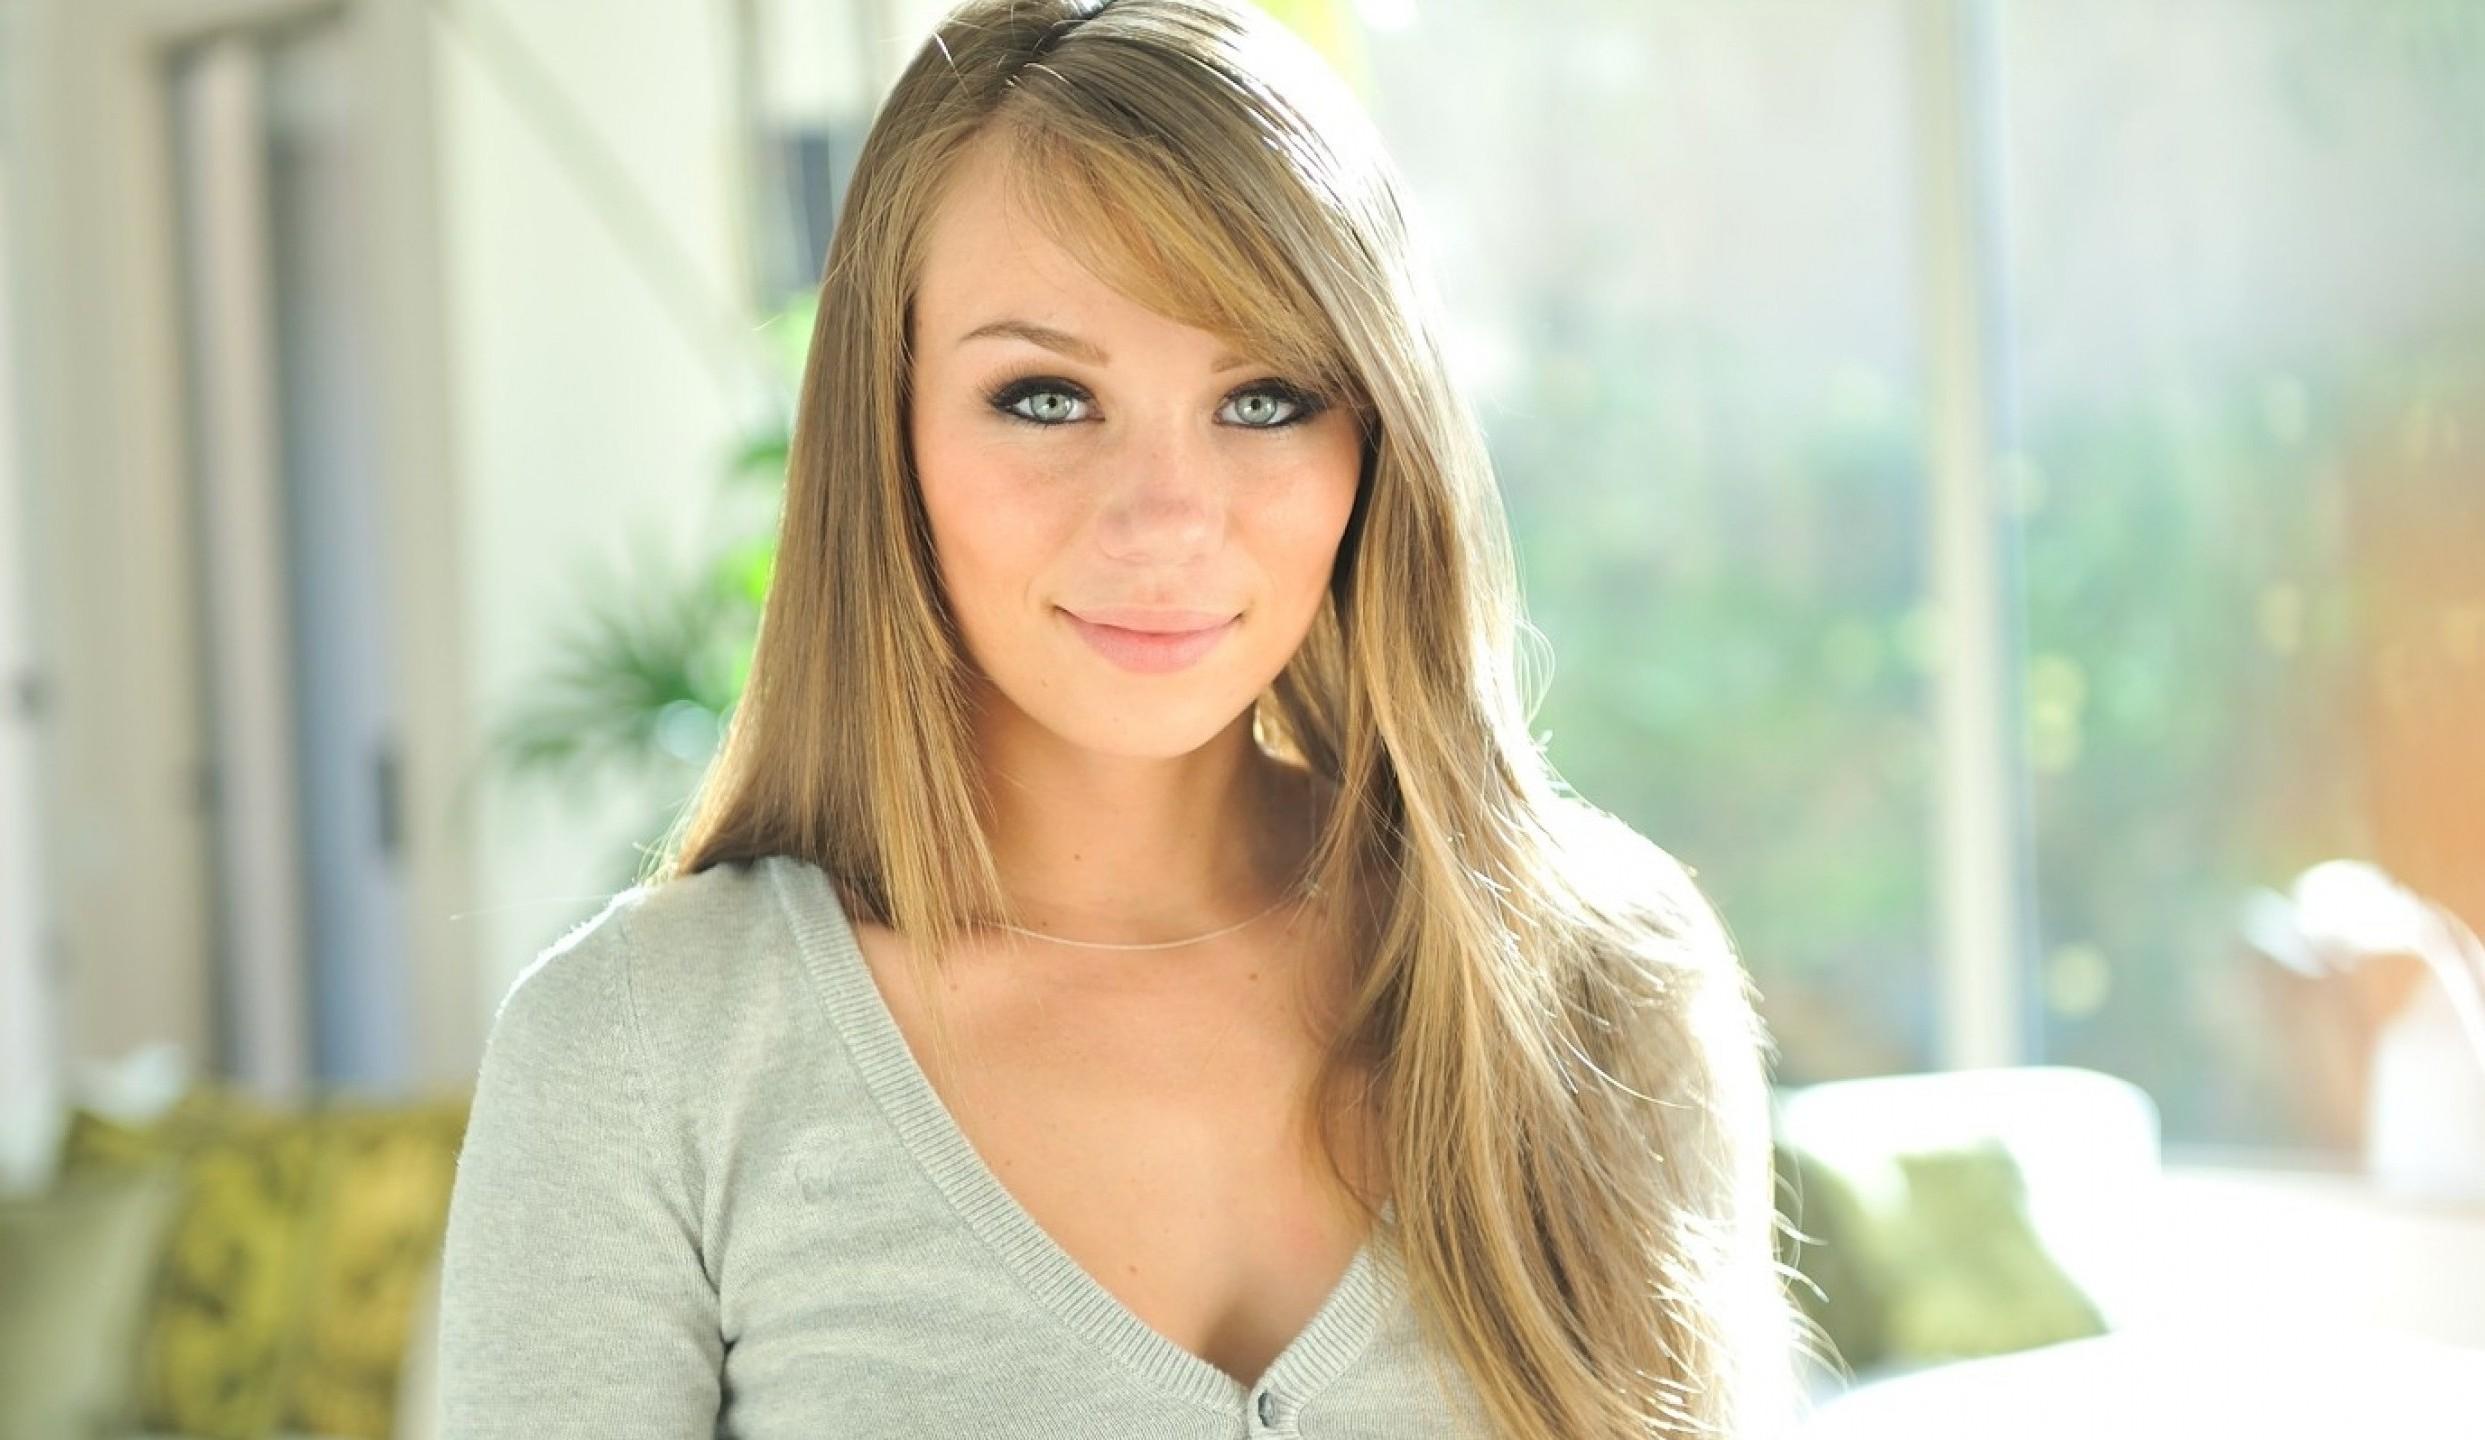 capri anderson gray eyes wallpaper and background